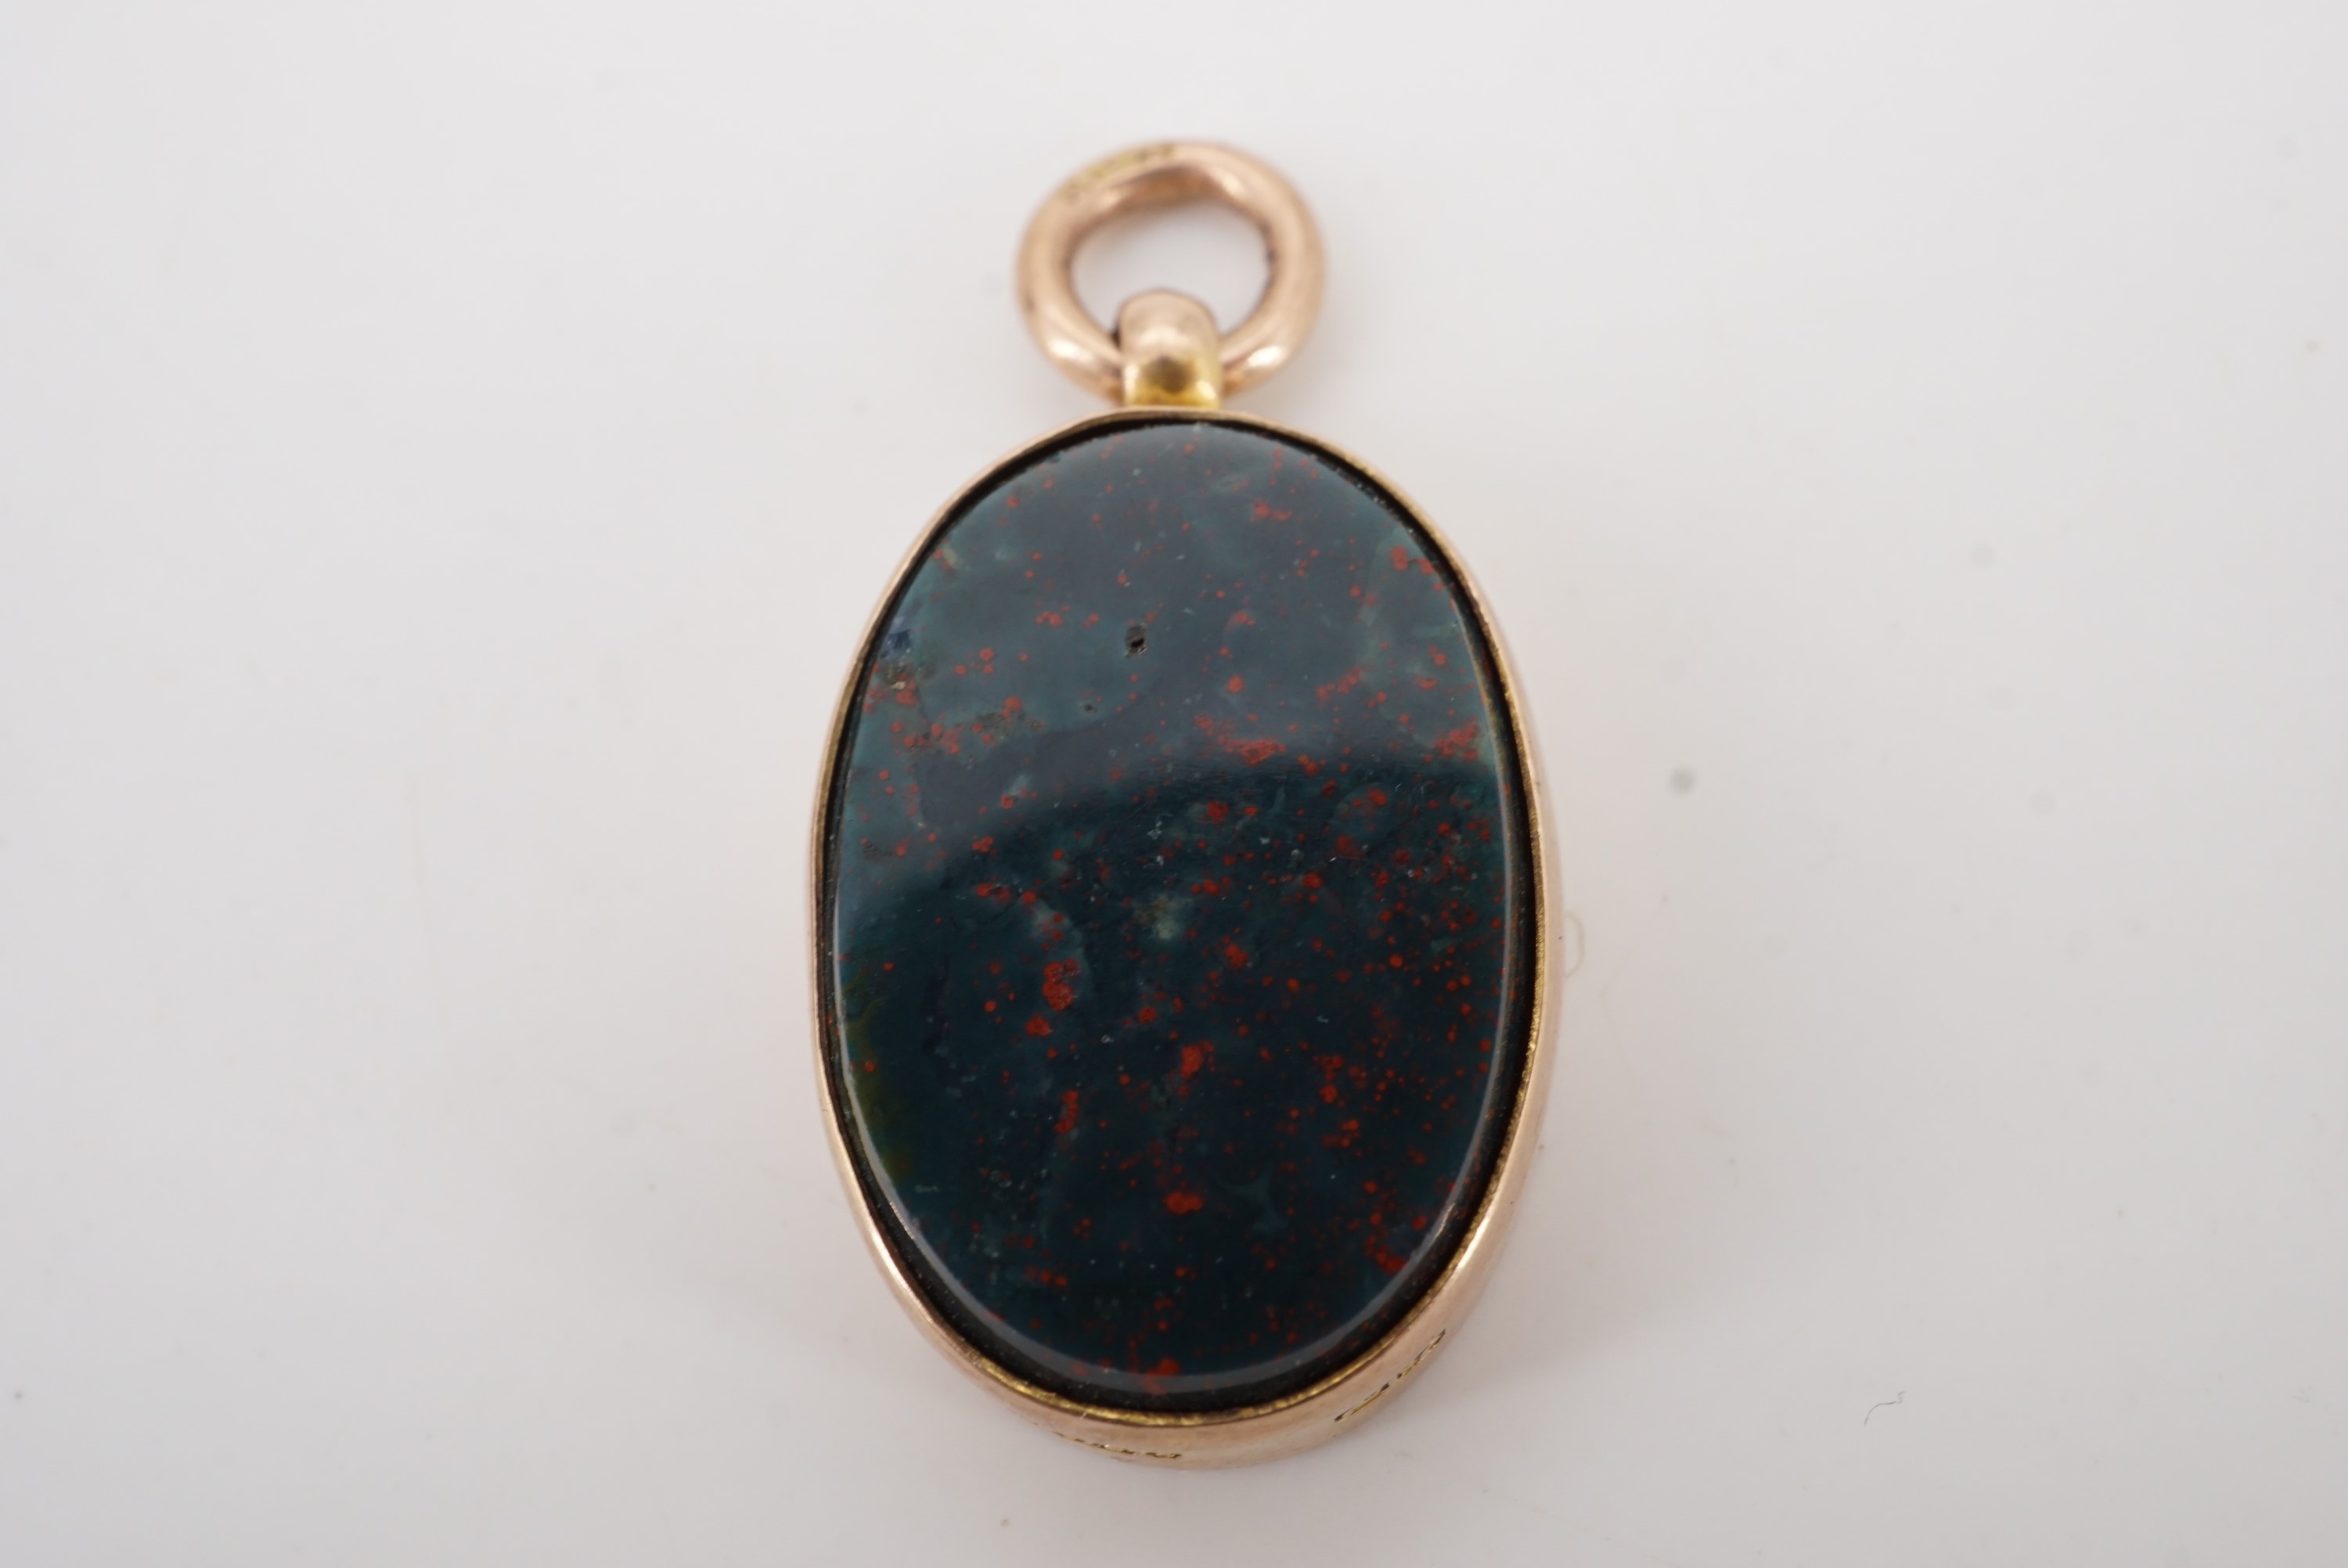 A 1920s 9 ct gold, carnelian and blood stone Masonic fob, 21 mm excluding suspender - Image 2 of 3